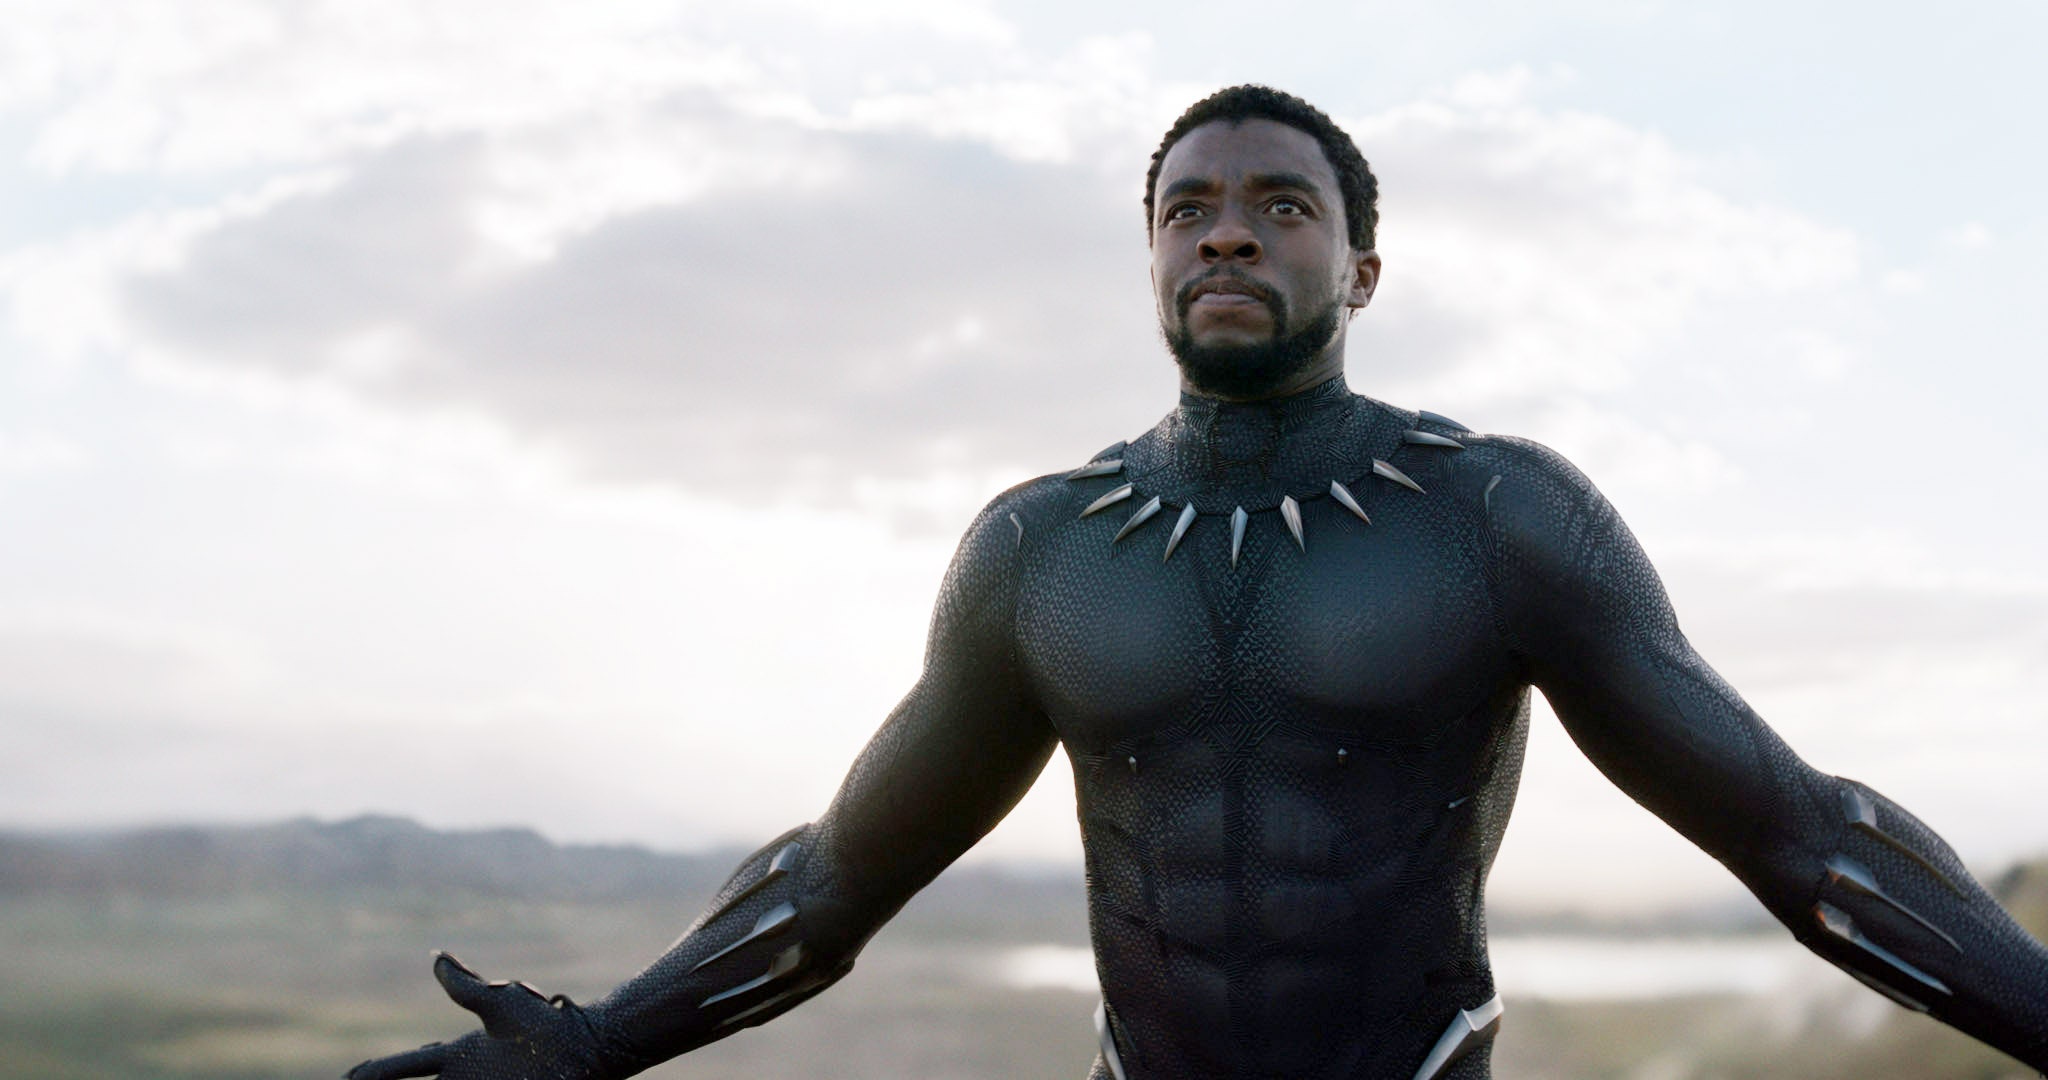 Who challenges T’Challa when he was about to be crowned king?